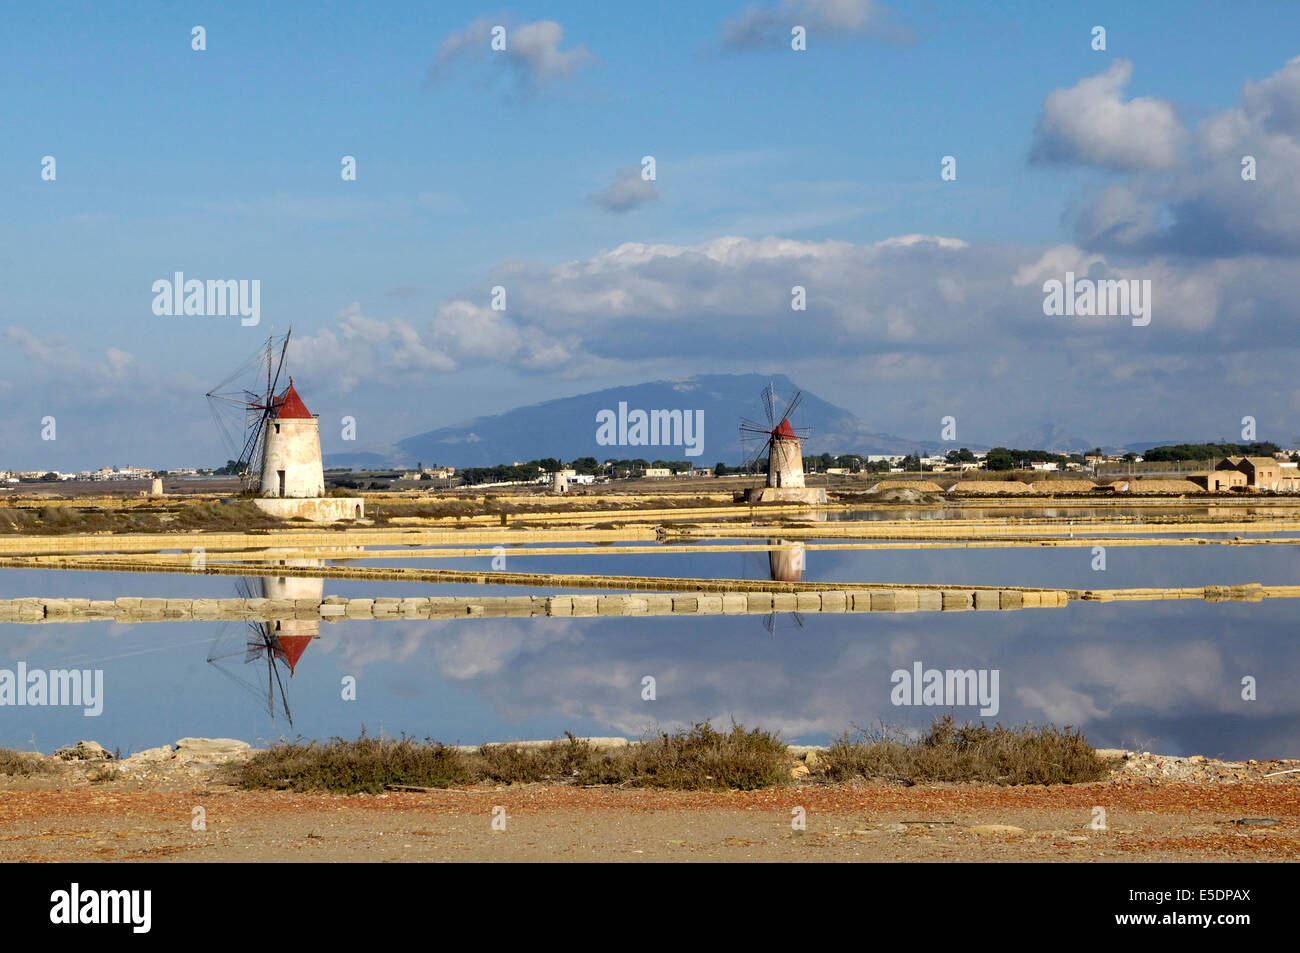 view of the salt pans of Trapani, with a nice background image of Mount Erice Stock Photo